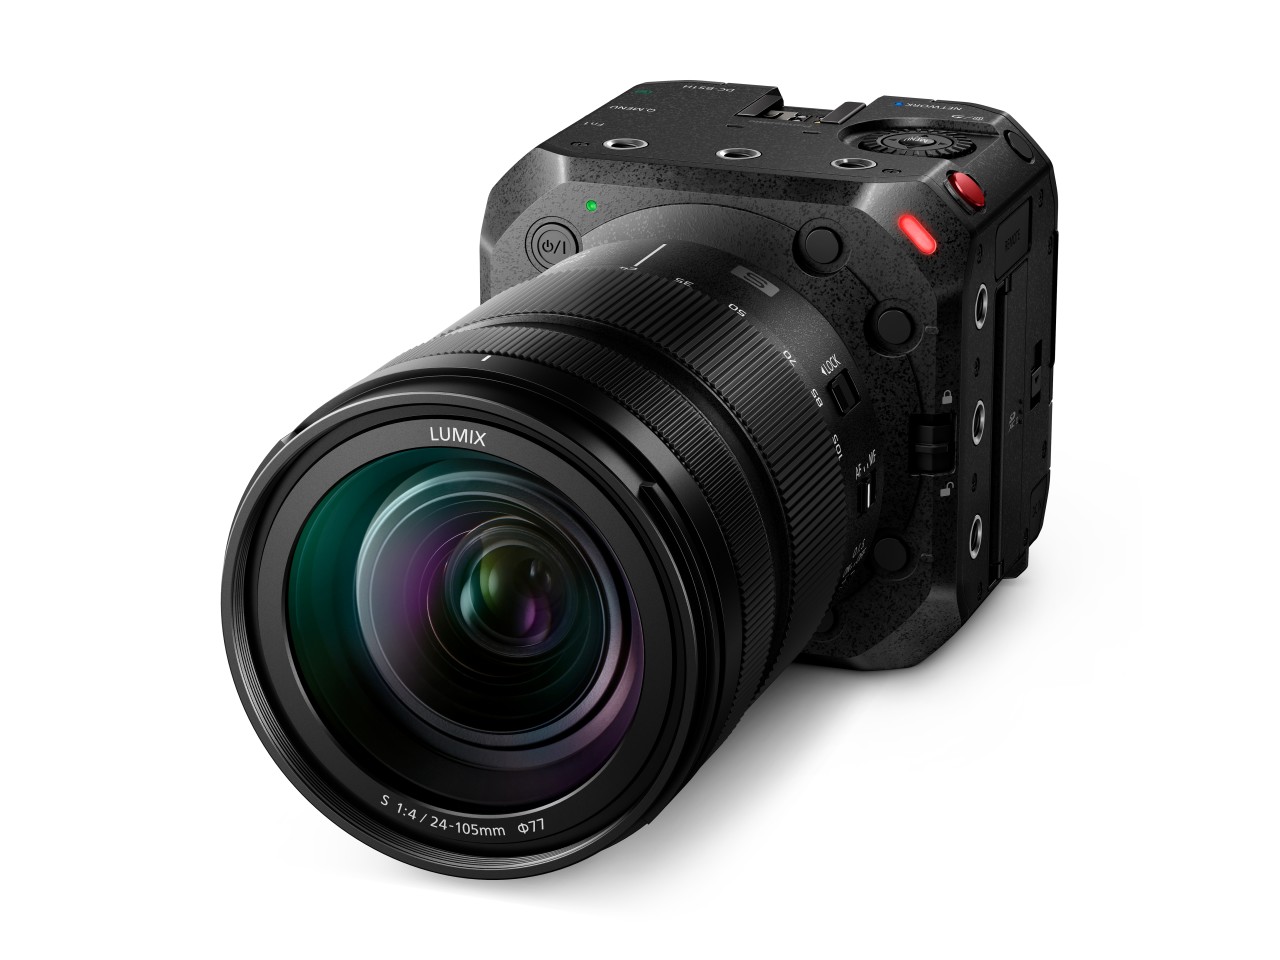 Image stabilization is available when the Lumix DC-BS1H is used with one of Panasonic's stabilized lenses